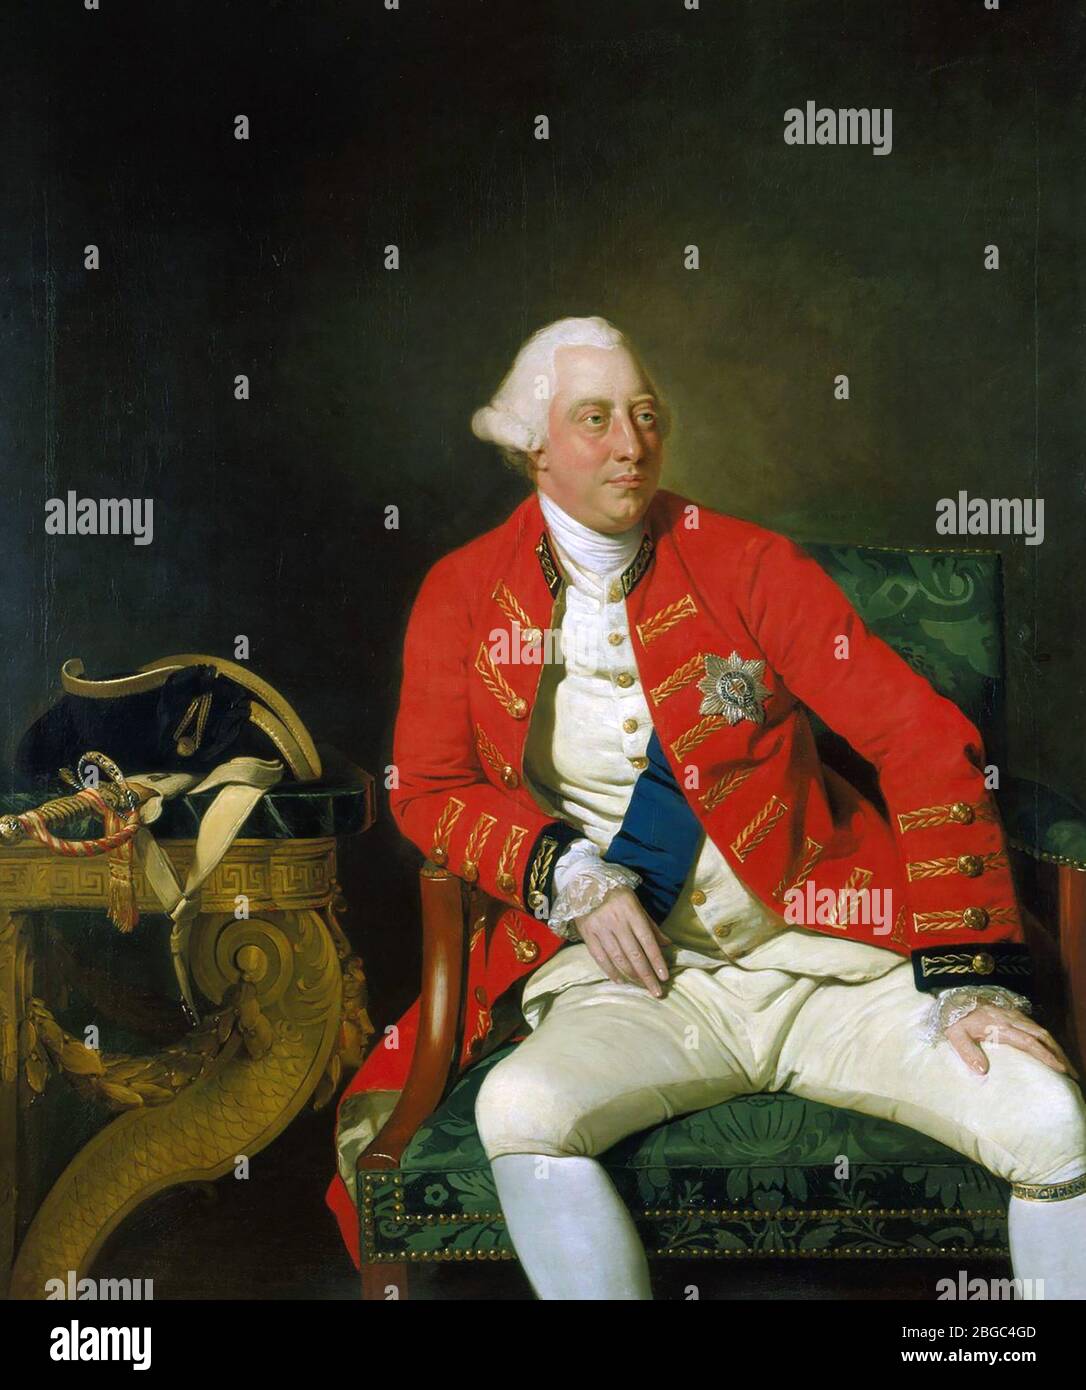 KING GEORGE III of Great Britain and Northern Ireland painted by Johann Zoffany in 1771. Stock Photo